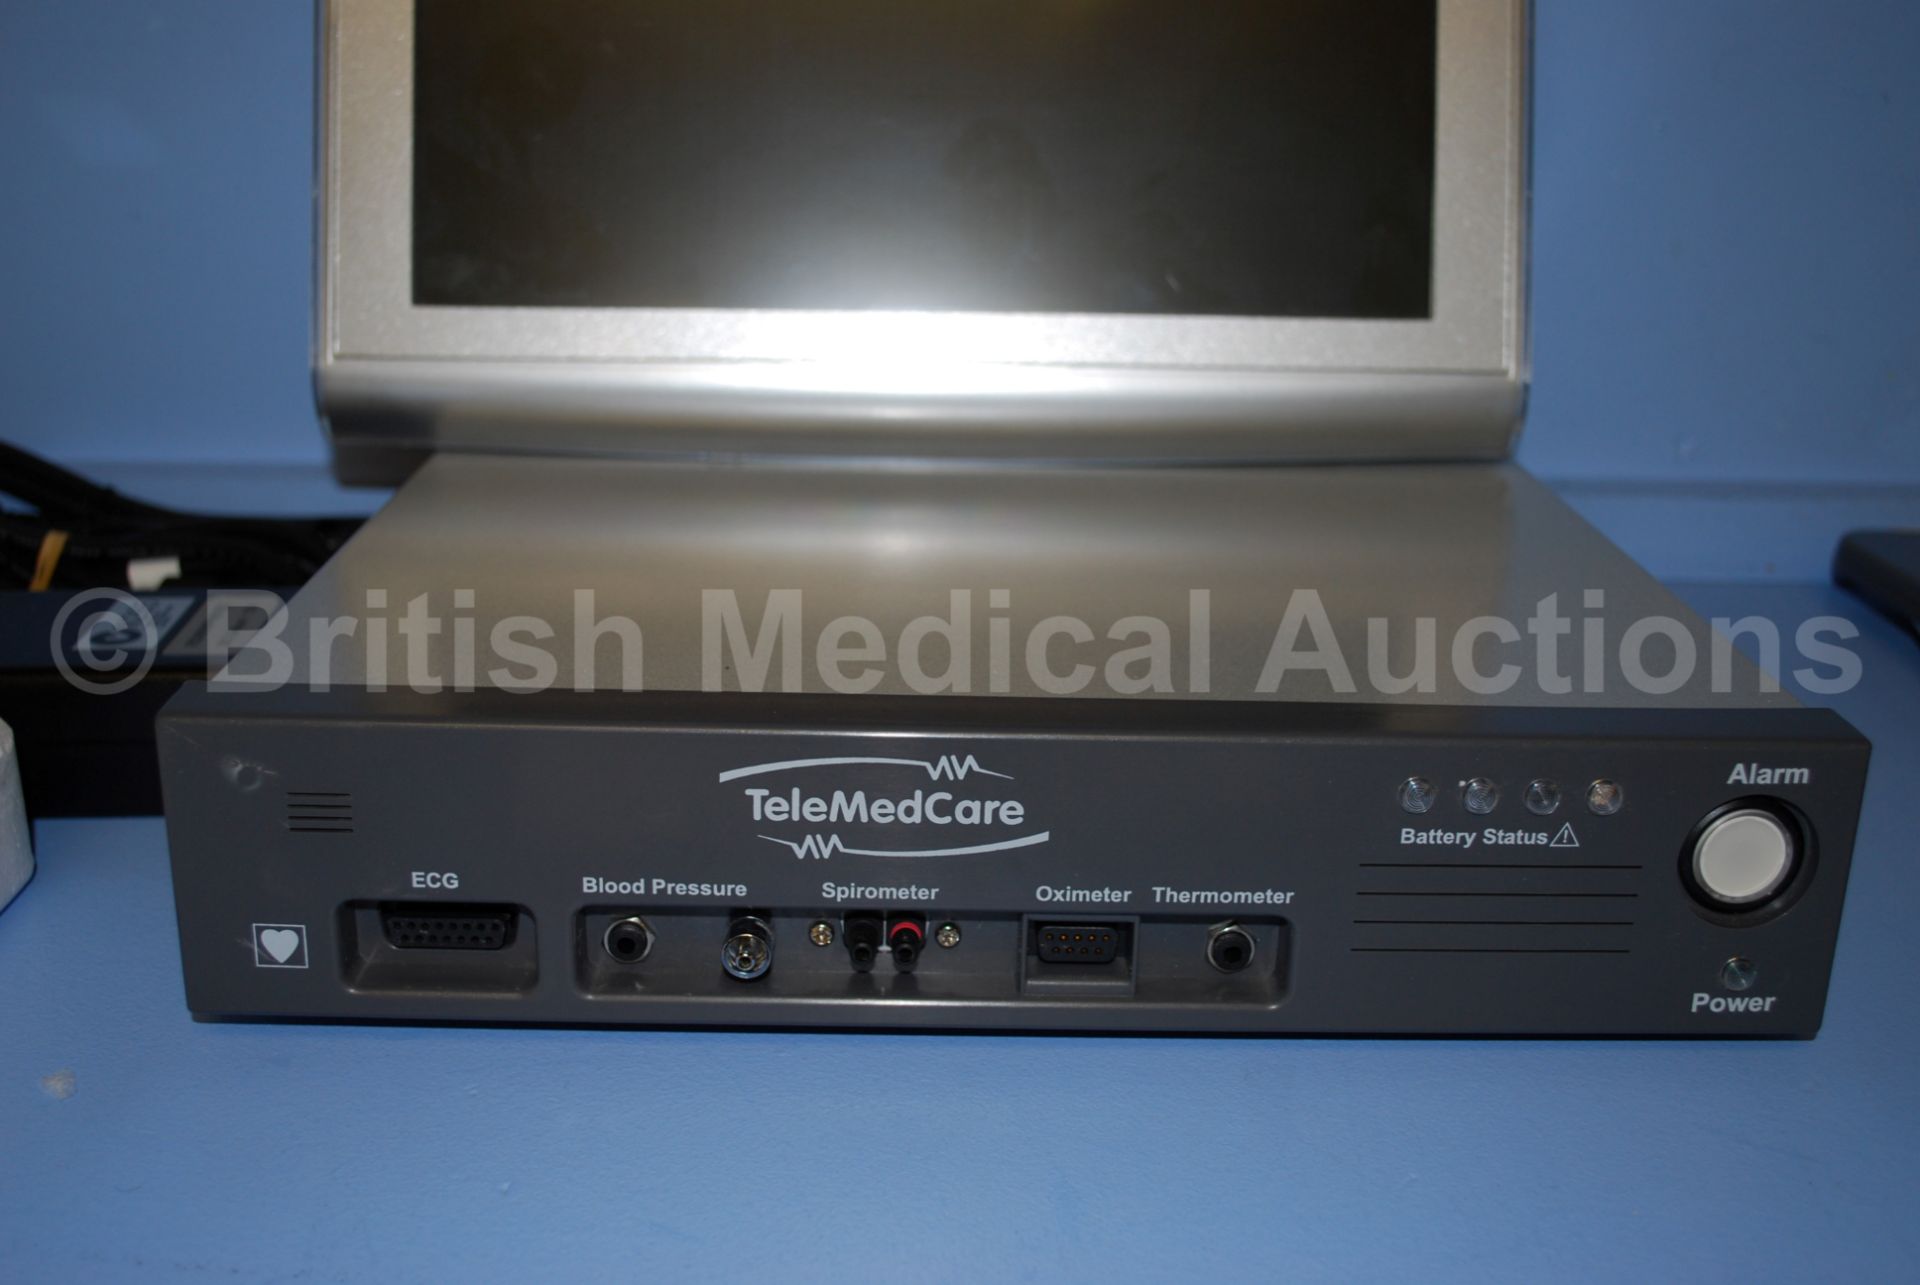 TeleMedCare Health Monitoring System Including Wor - Image 4 of 6